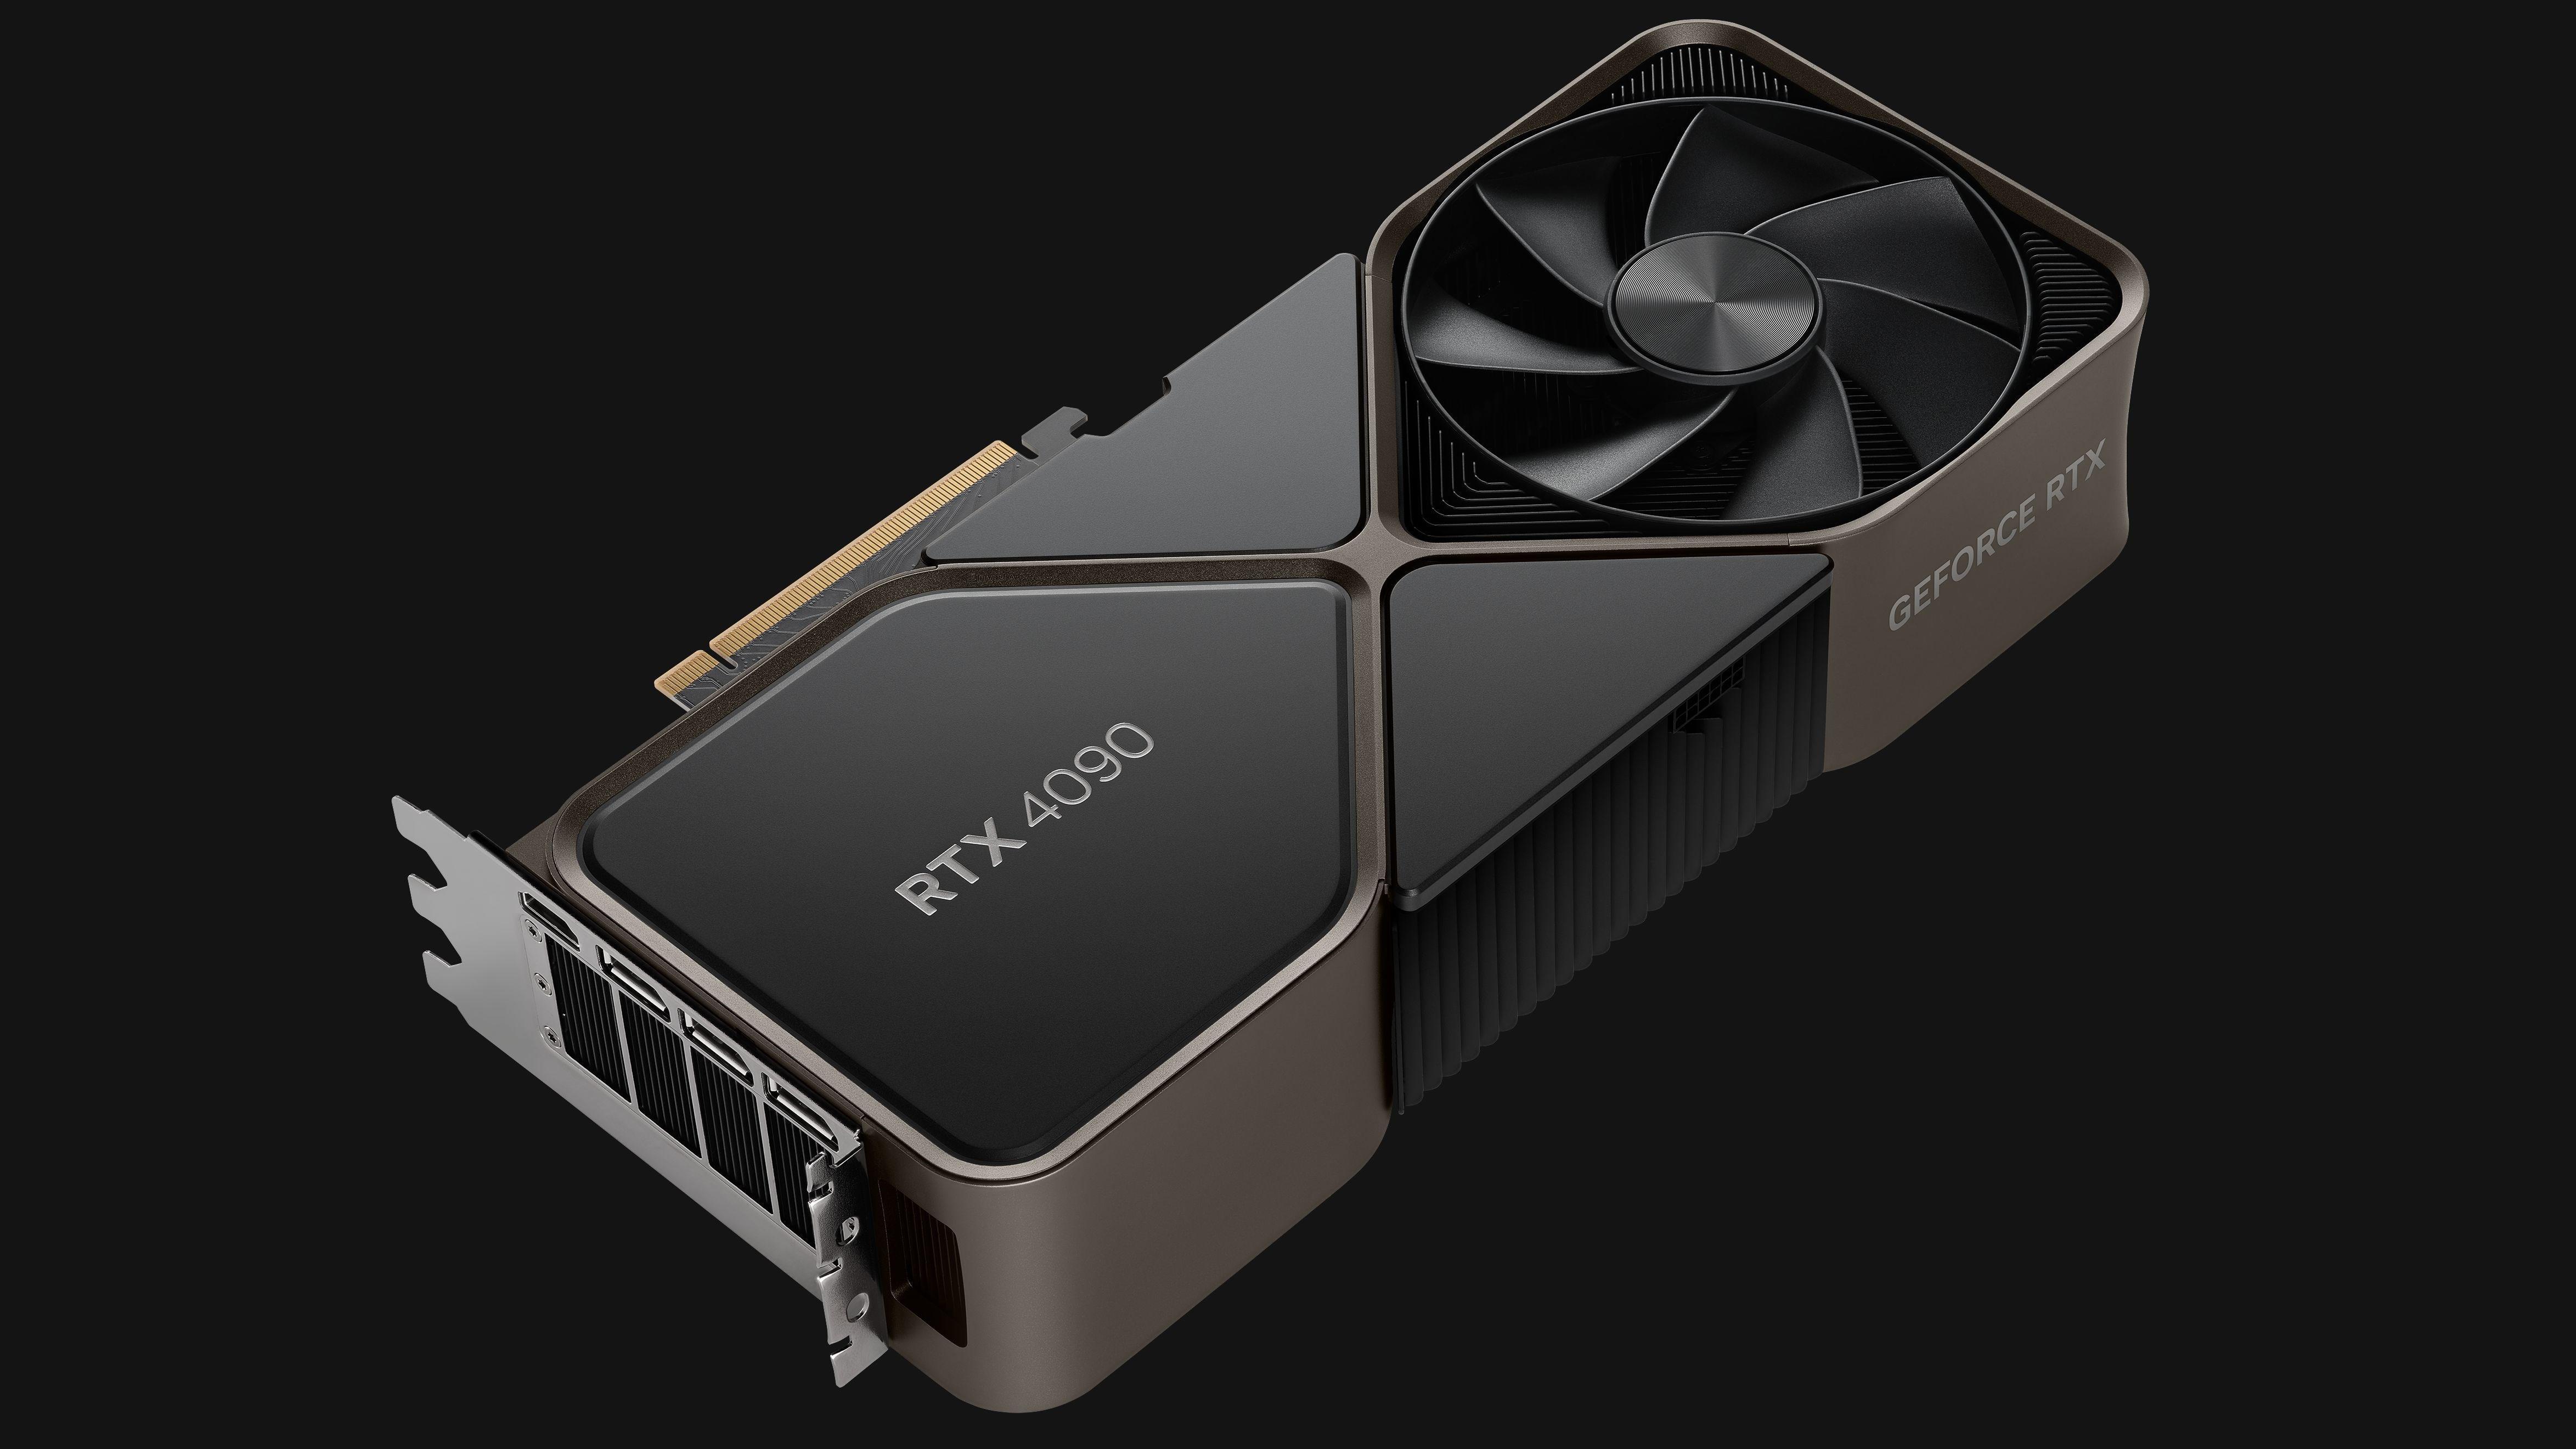 Rtx 4090 24gb gddr6x. RTX 4090 founders Edition. Ge Force RTX 4090. RTX 4090 ti. RTX 4080 founders Edition.